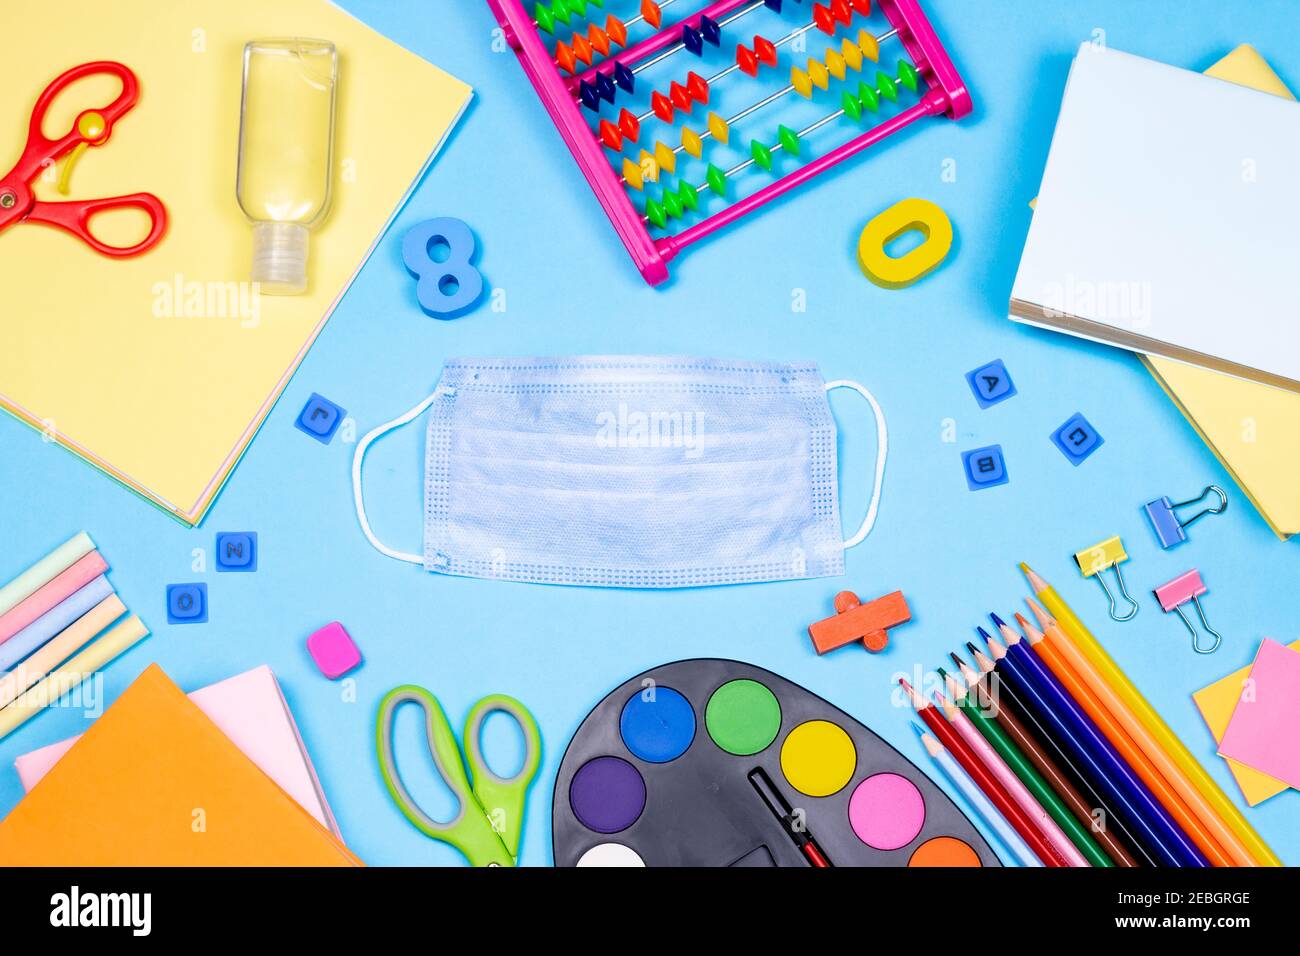 Stationery accessory and medical face mask on blue background. back to School after pandemic concept. Education, office and freelancer work flat lay c Stock Photo